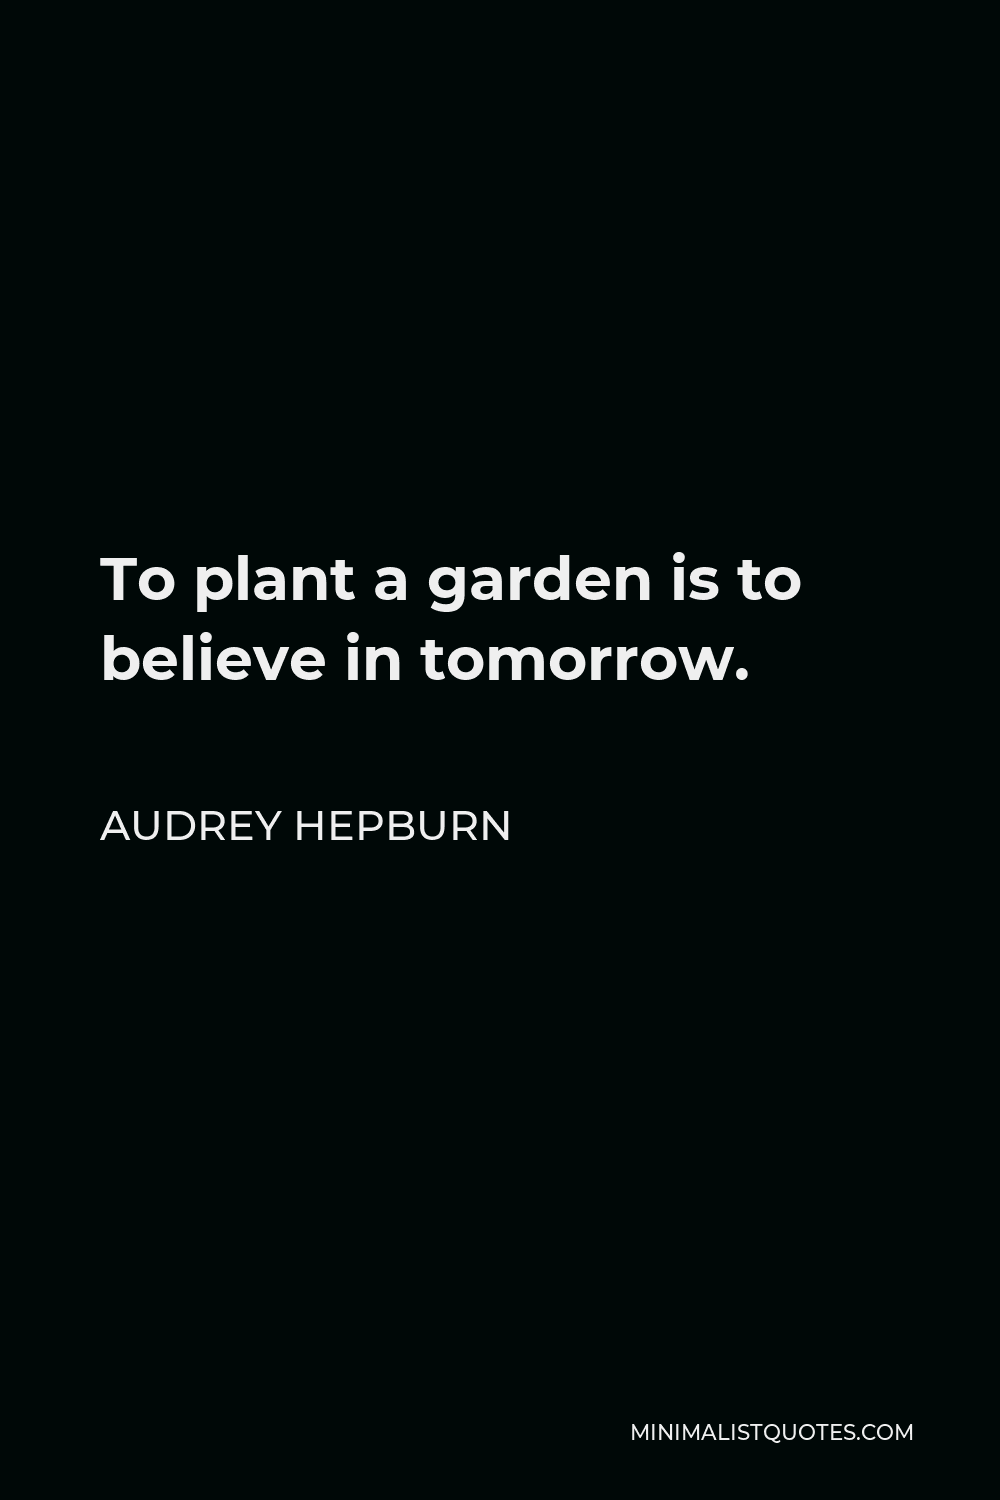 Audrey Hepburn Quote - To plant a garden is to believe in tomorrow.